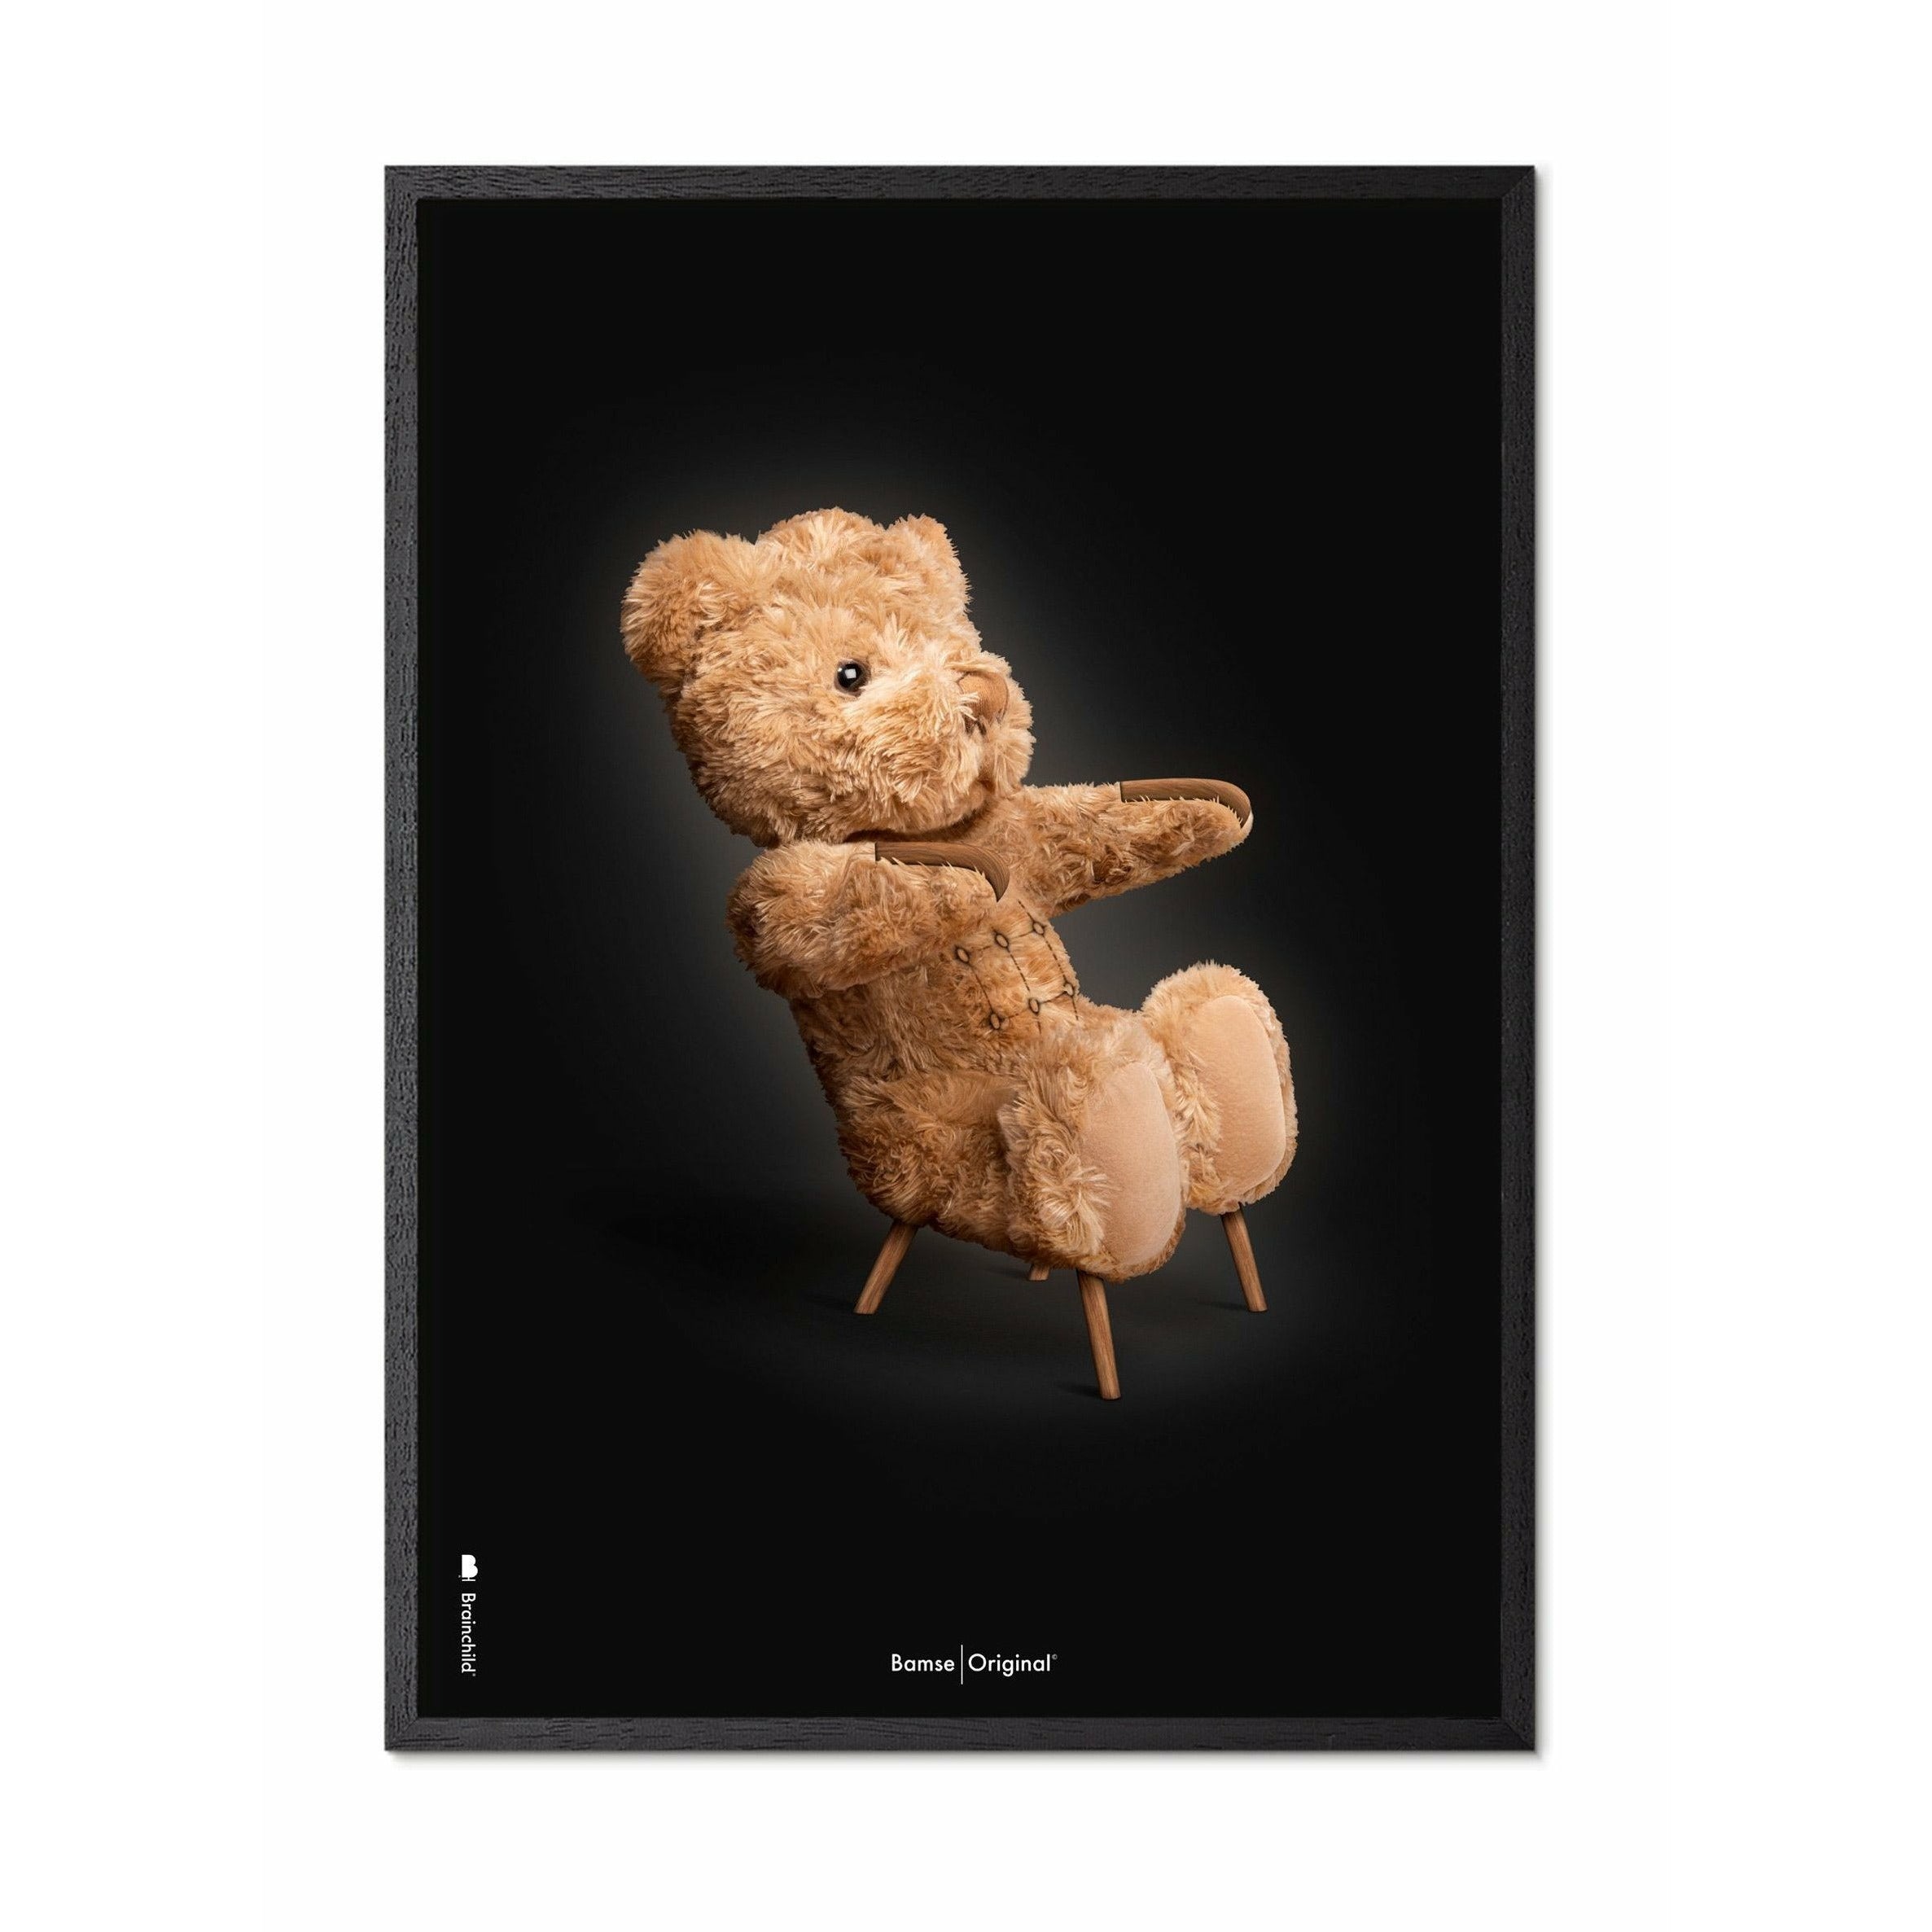 Brainchild Teddy Bear Classic Poster, Frame In Black Lacquered Wood 30x40 Cm, Black Background